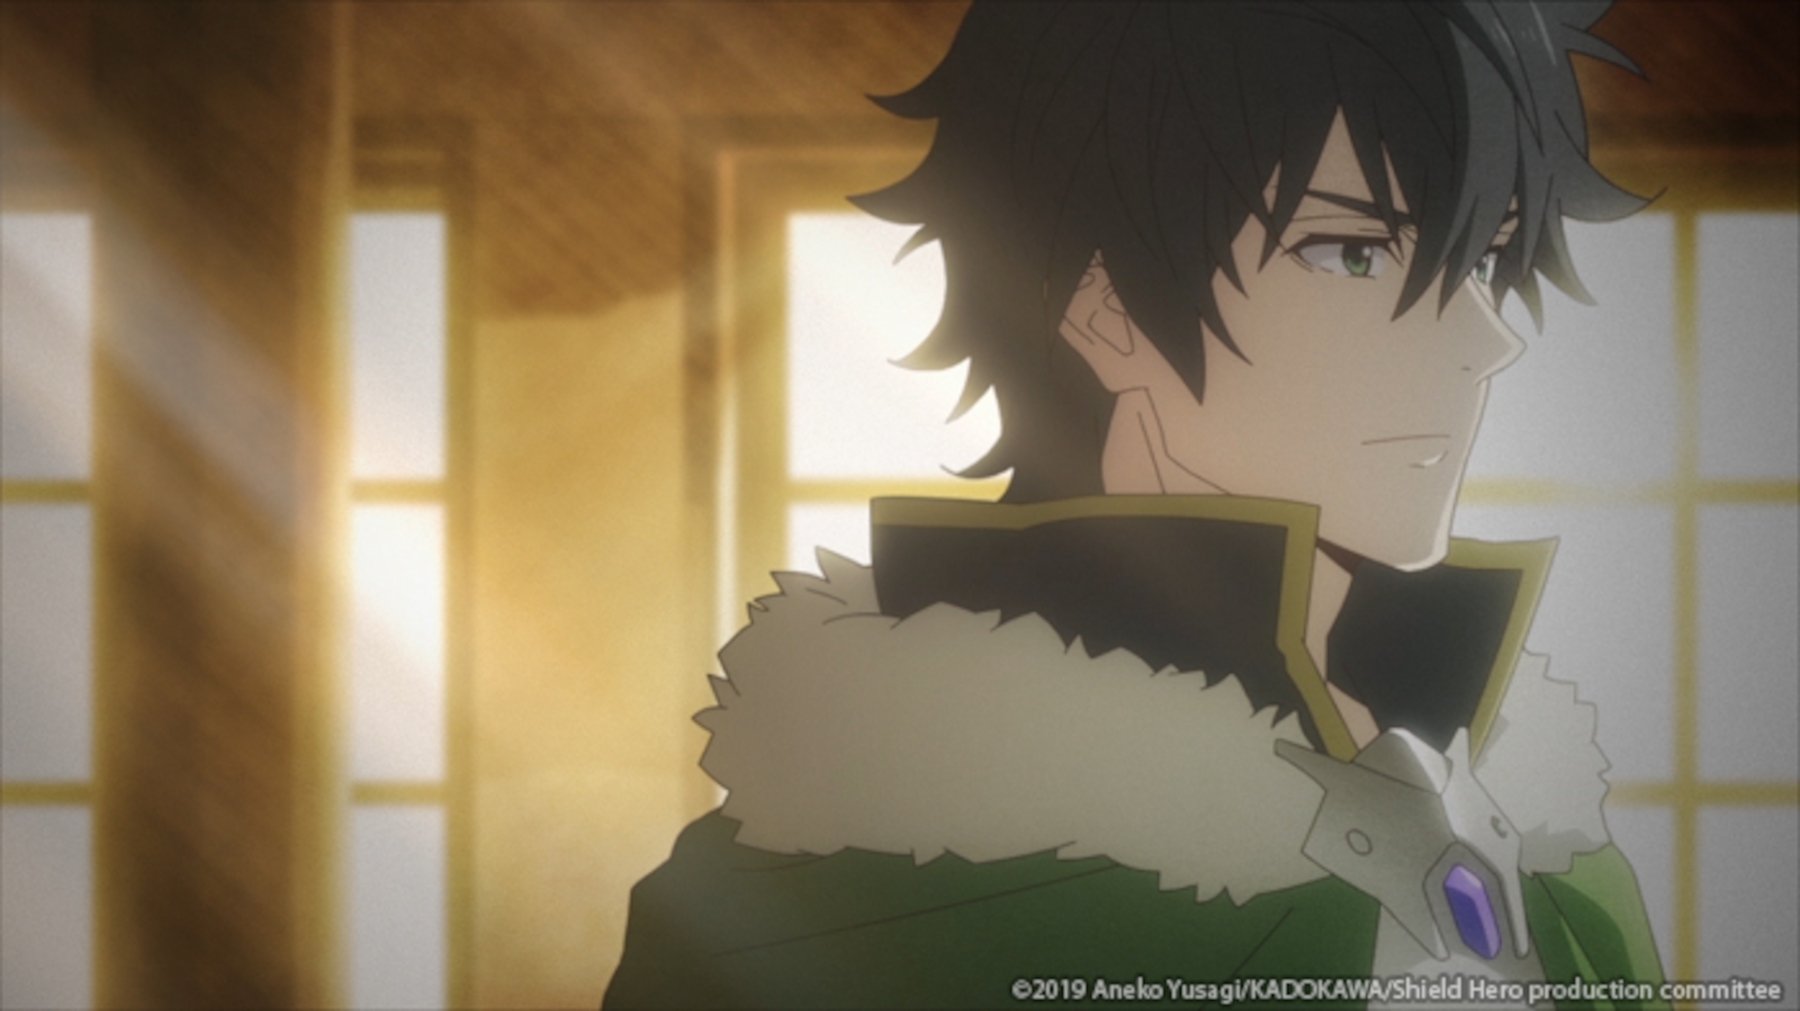 Naofumi Iwatani in 'The Rising of the Shield Hero,' which returns for season 2 this April. He's looking out at something and wearing a green cloak.